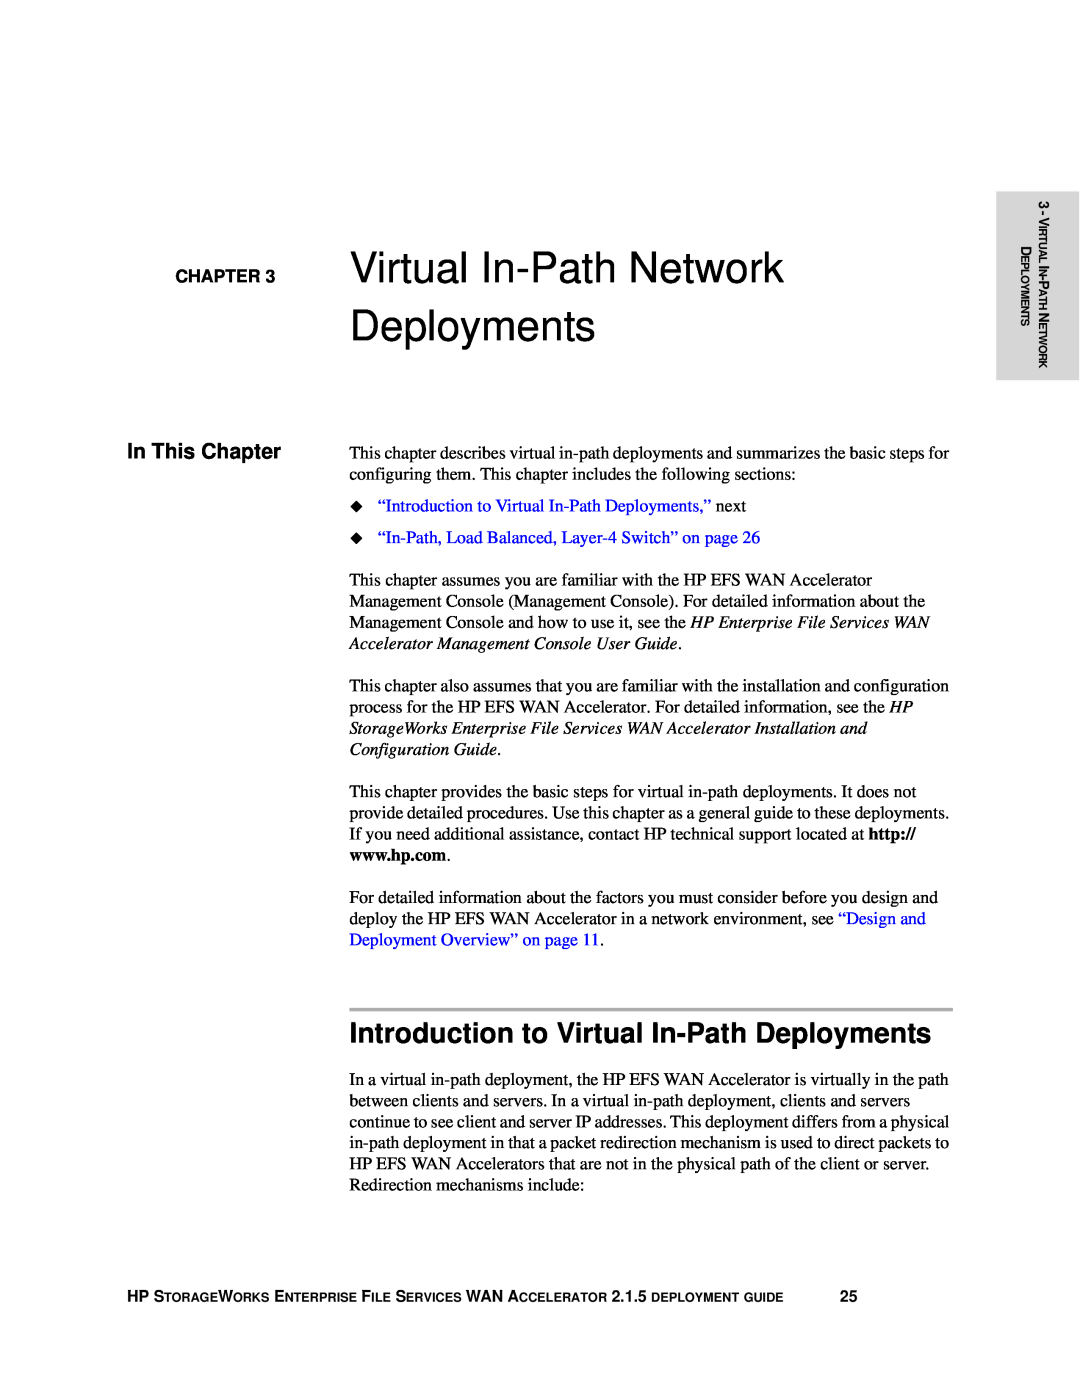 HP Enterprise File Services WAN Accelerator manual Virtual In-Path Network Deployments, Deployment Overview” on page 